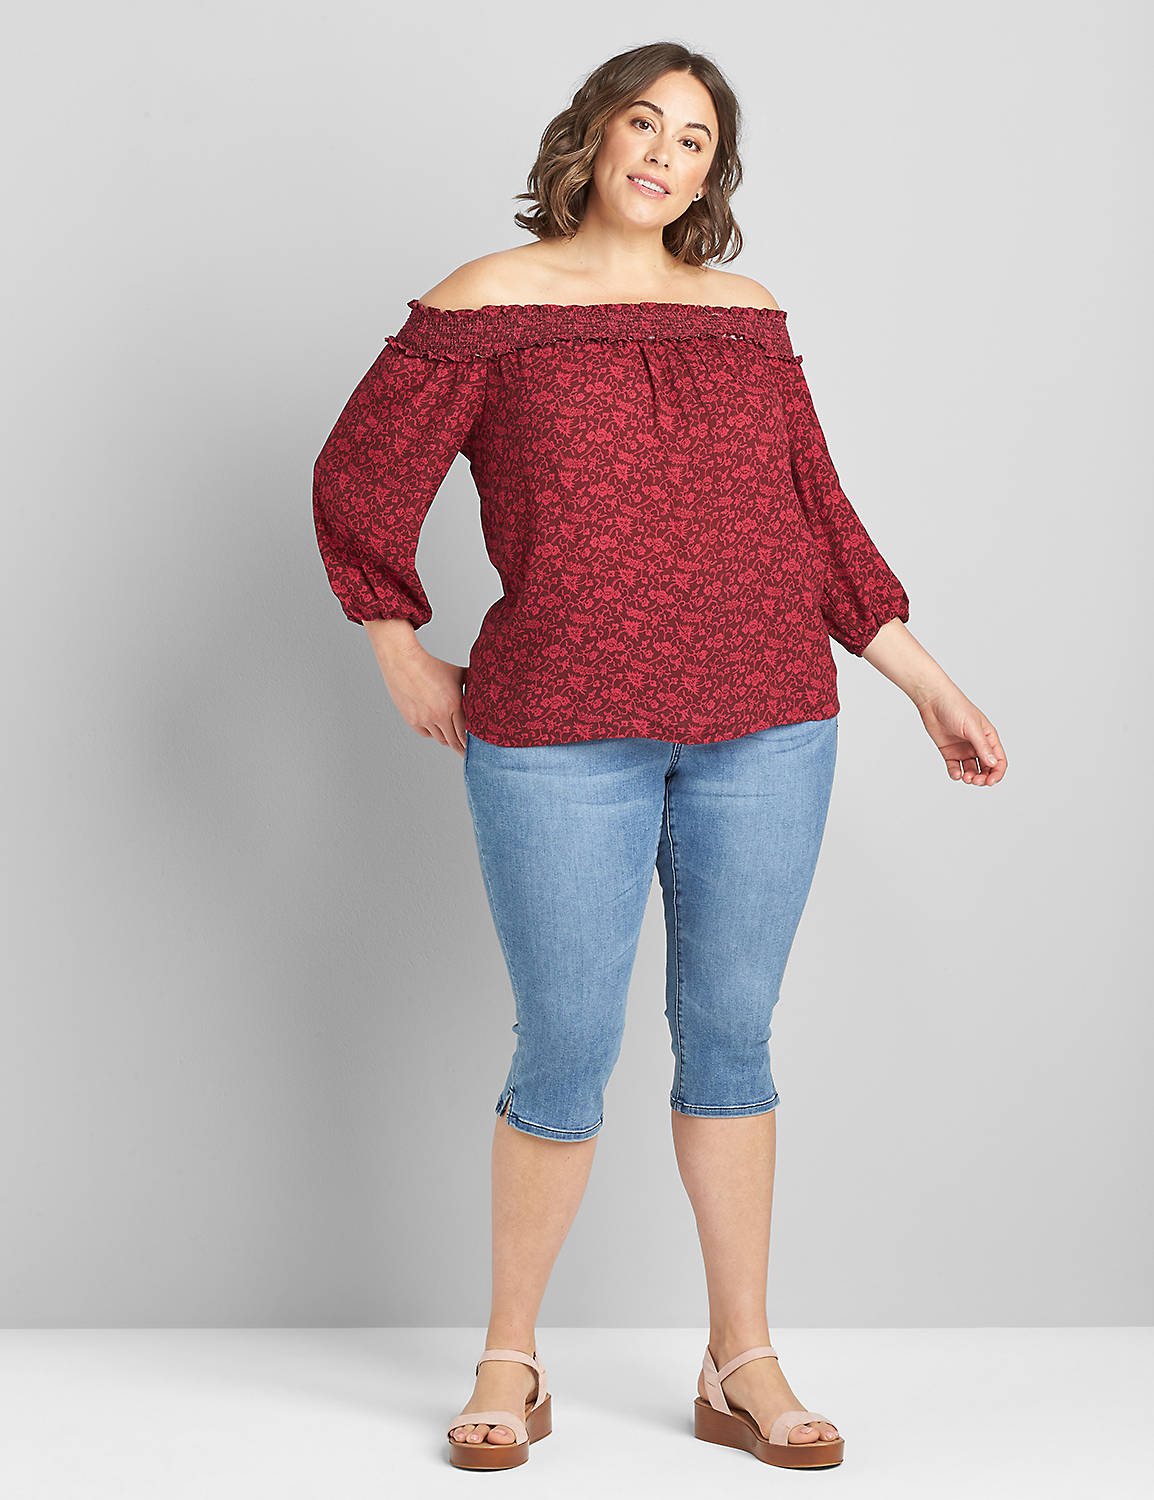 3/4 Sleeve Off-the-Shoulder Top Product Image 3